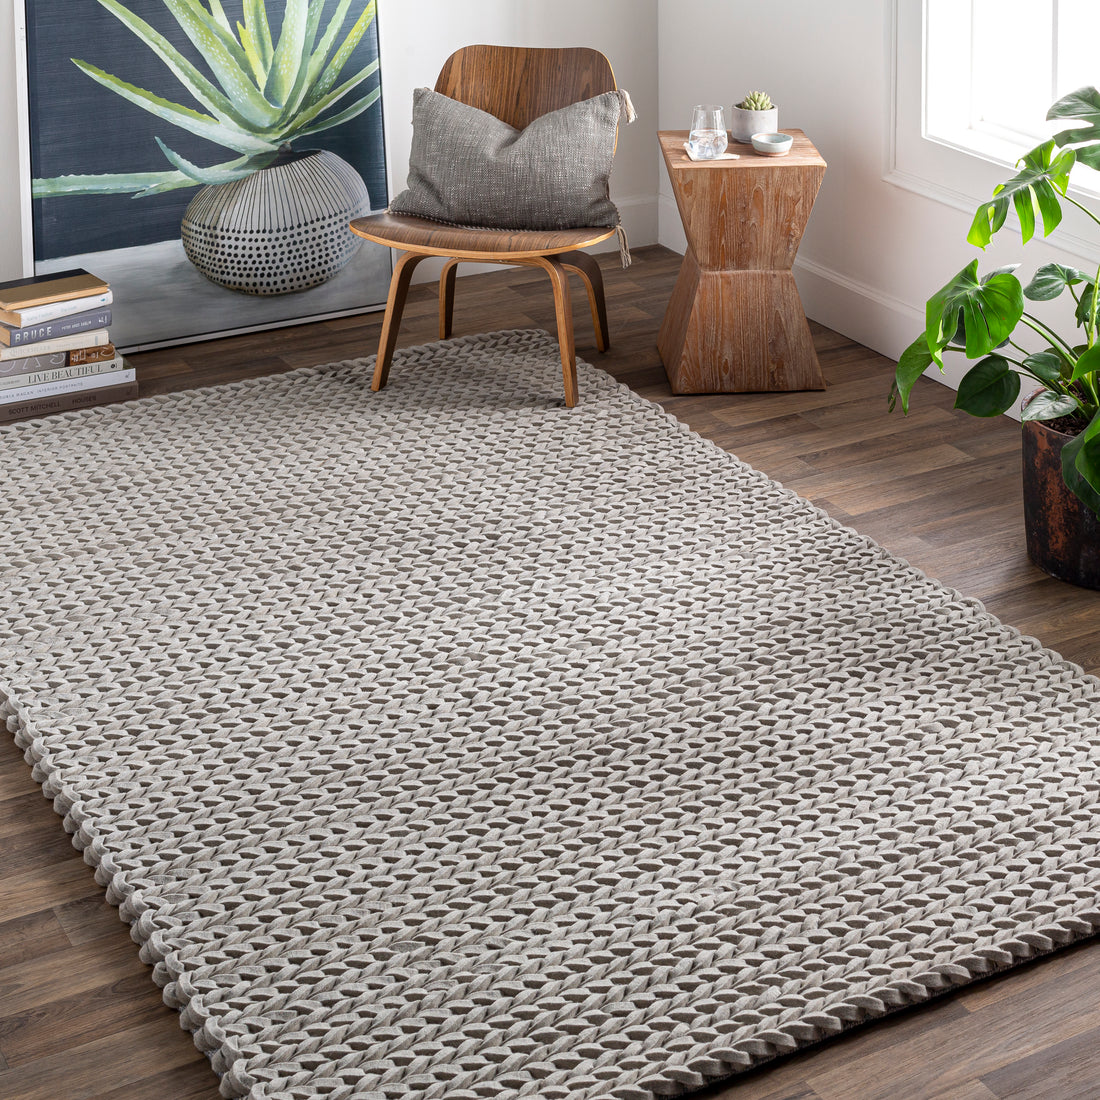 Anchorage Cable Knit Area Rug